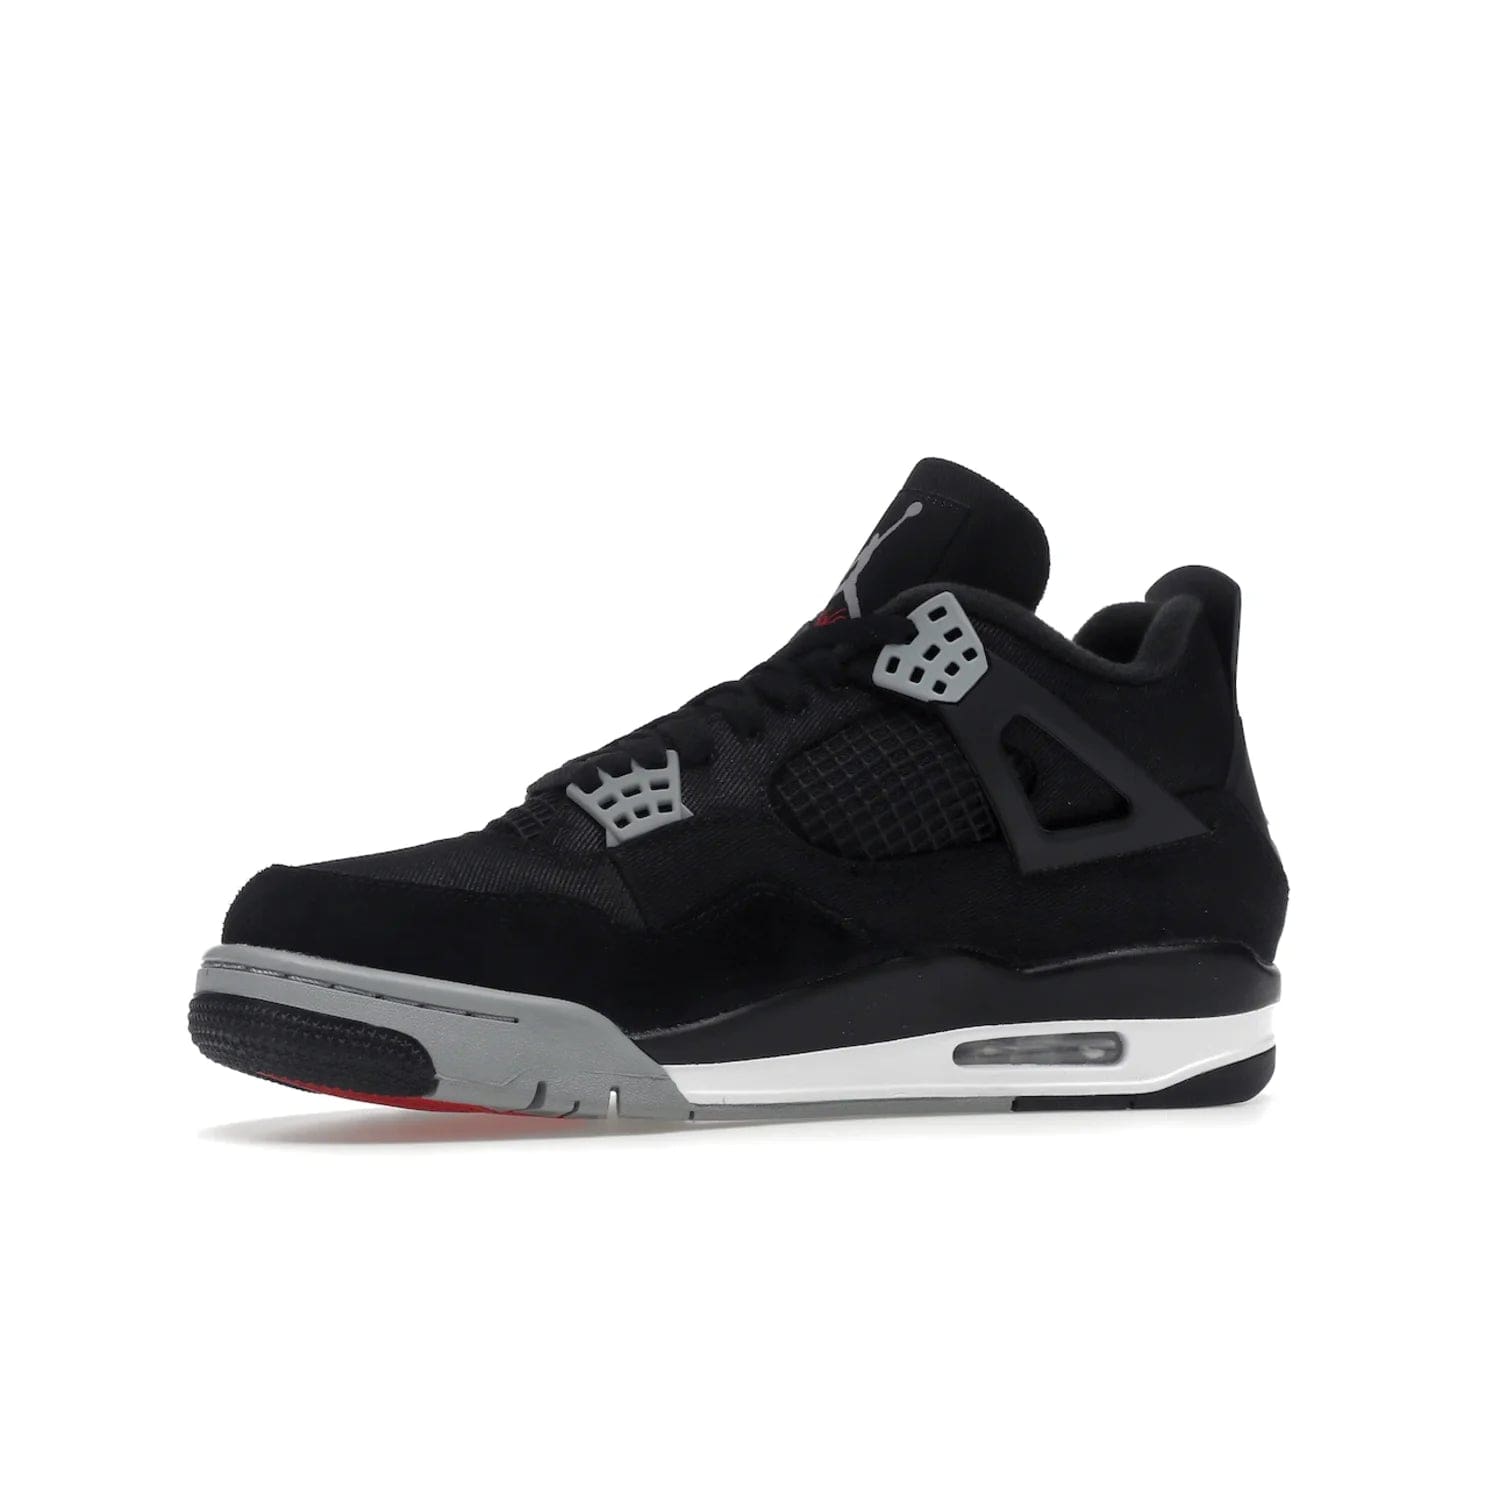 Jordan 4 Retro SE Black Canvas - Image 17 - Only at www.BallersClubKickz.com - The Air Jordan 4 Retro SE Black Canvas brings timeless style and modern luxury. Classic mid-top sneaker in black canvas and grey suede with tonal Jumpman logo, Flight logo and polyurethane midsole with visible Air-sole cushioning. Refresh your sneaker collection and rock the Air Jordan 4 Retro SE Black Canvas.